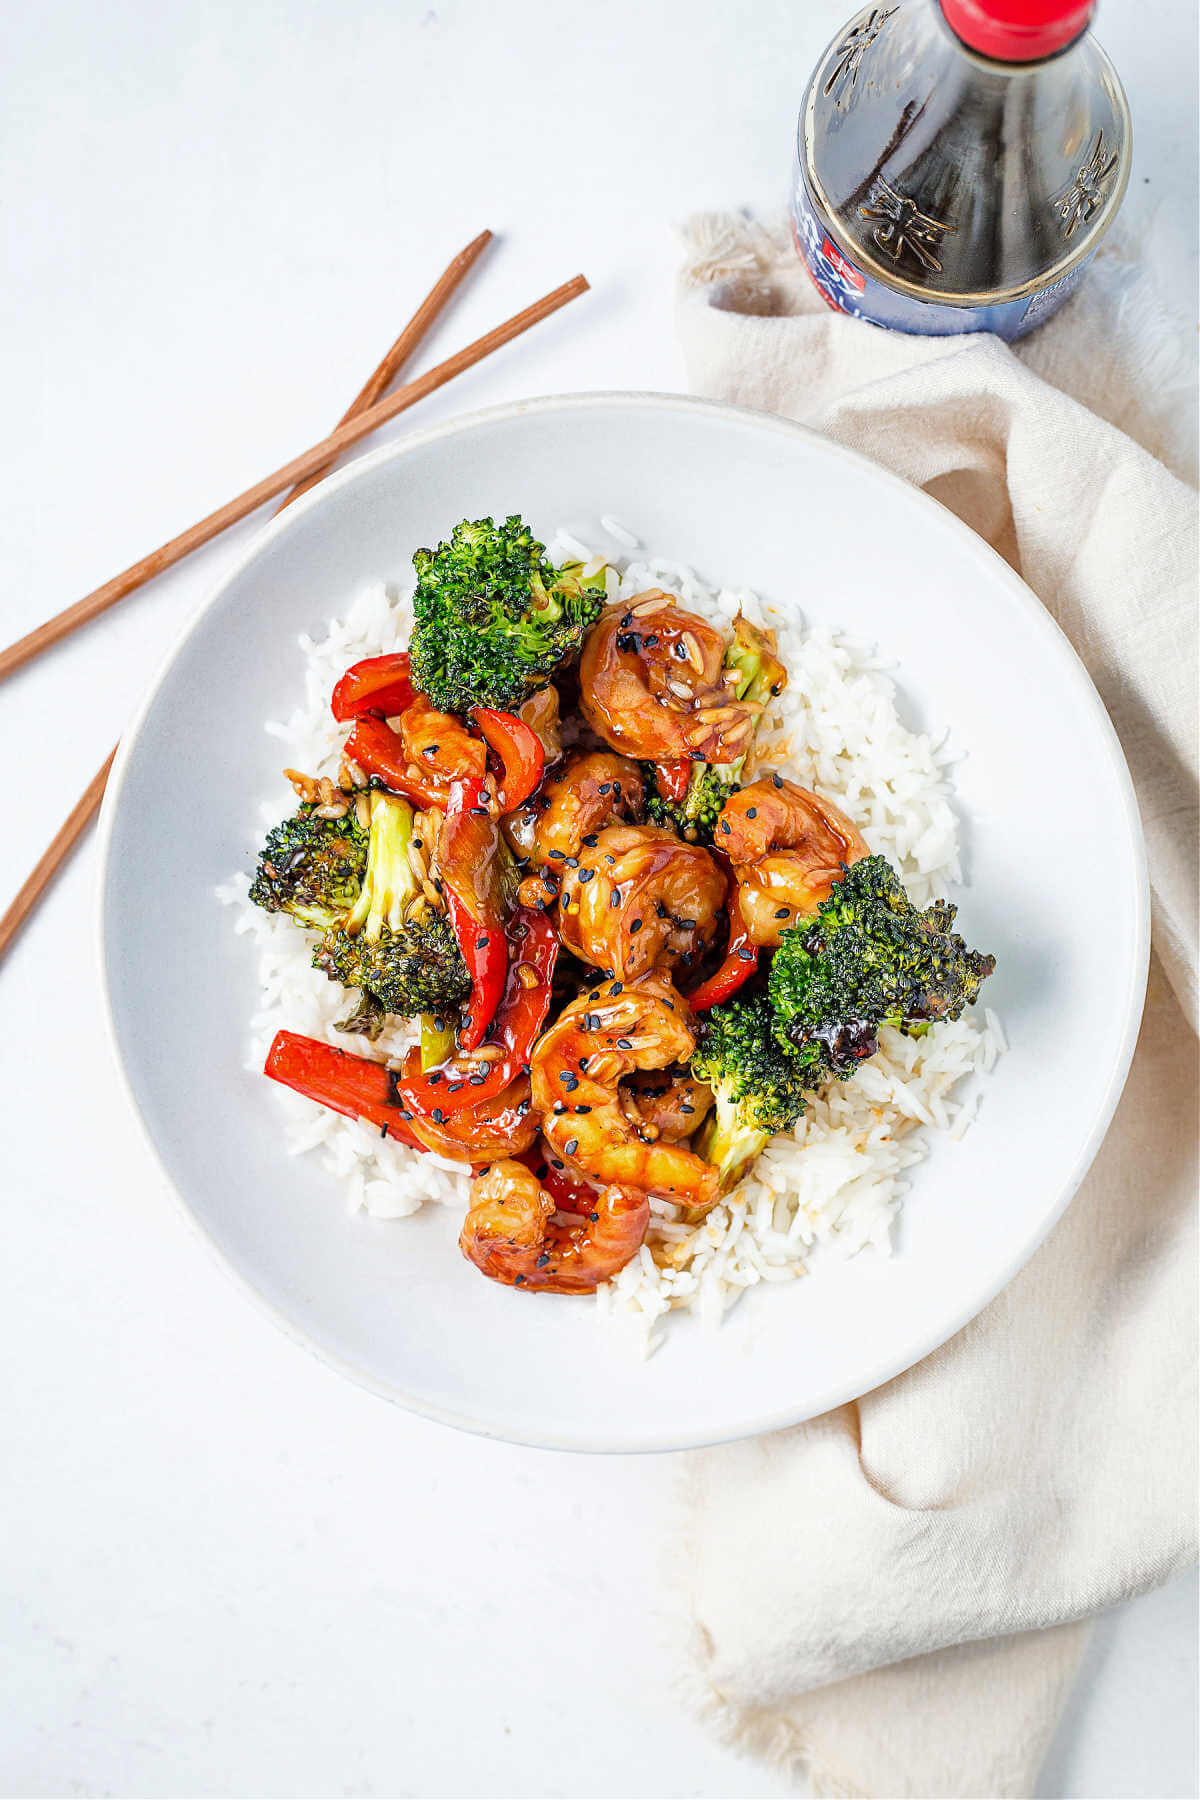 shrimp stir fry over a bed of white rice in a bowl on a table with chopsticks and a bottle of soy sauce.